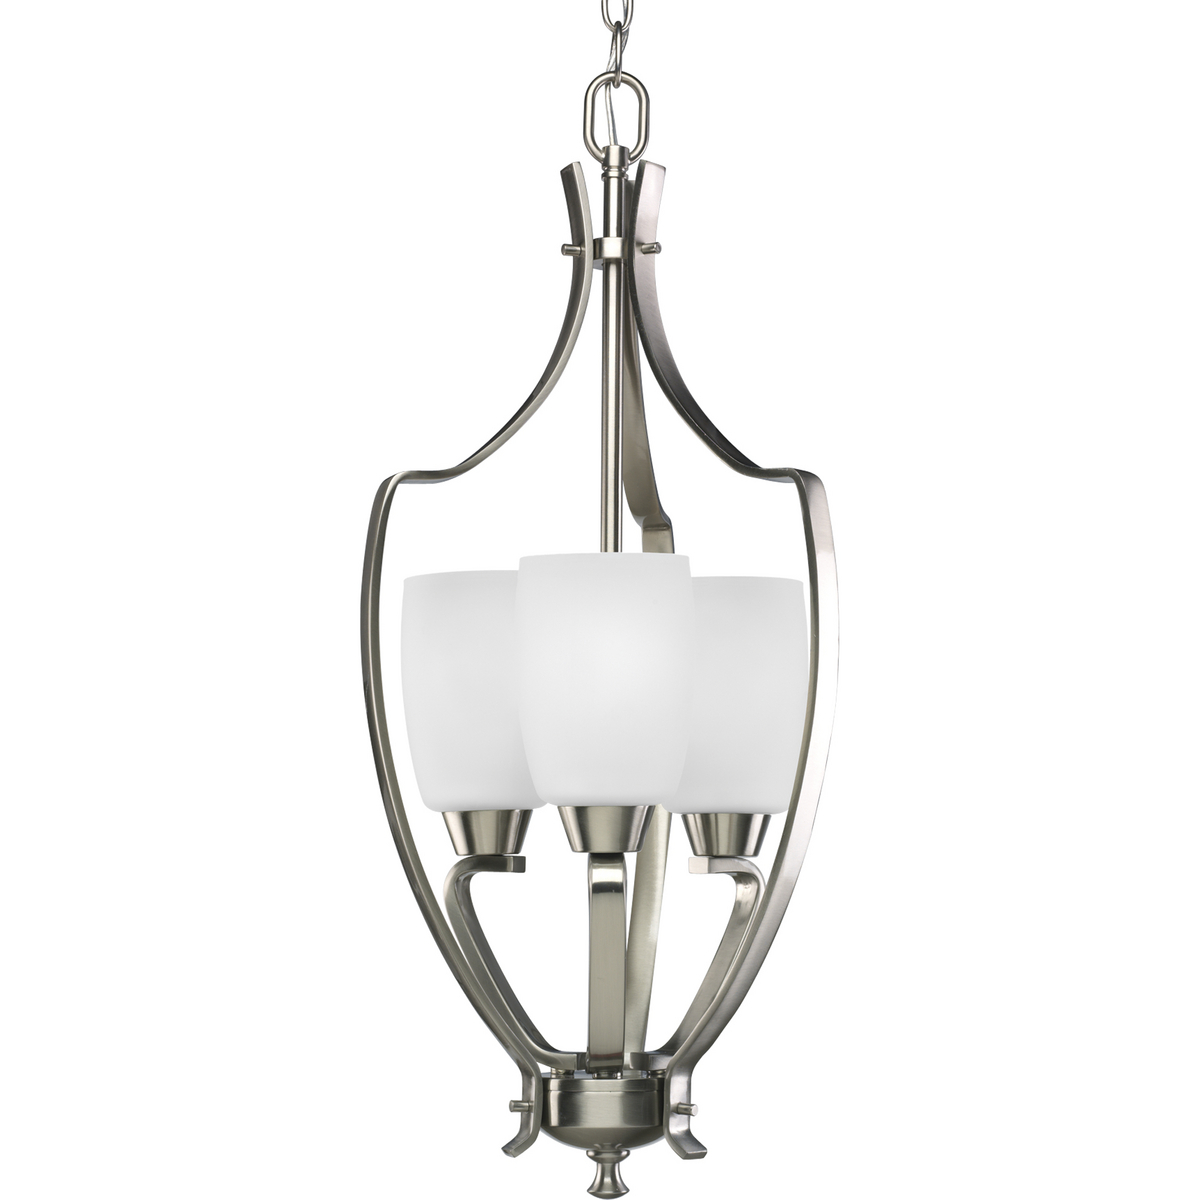 The Wisten Collection features sweeping arcs framing elegant, tapered glass shades. Cool and modern with a casual flair, Wisten provides a signature look to any room. Three-light foyer in a Brushed Nickel finish.